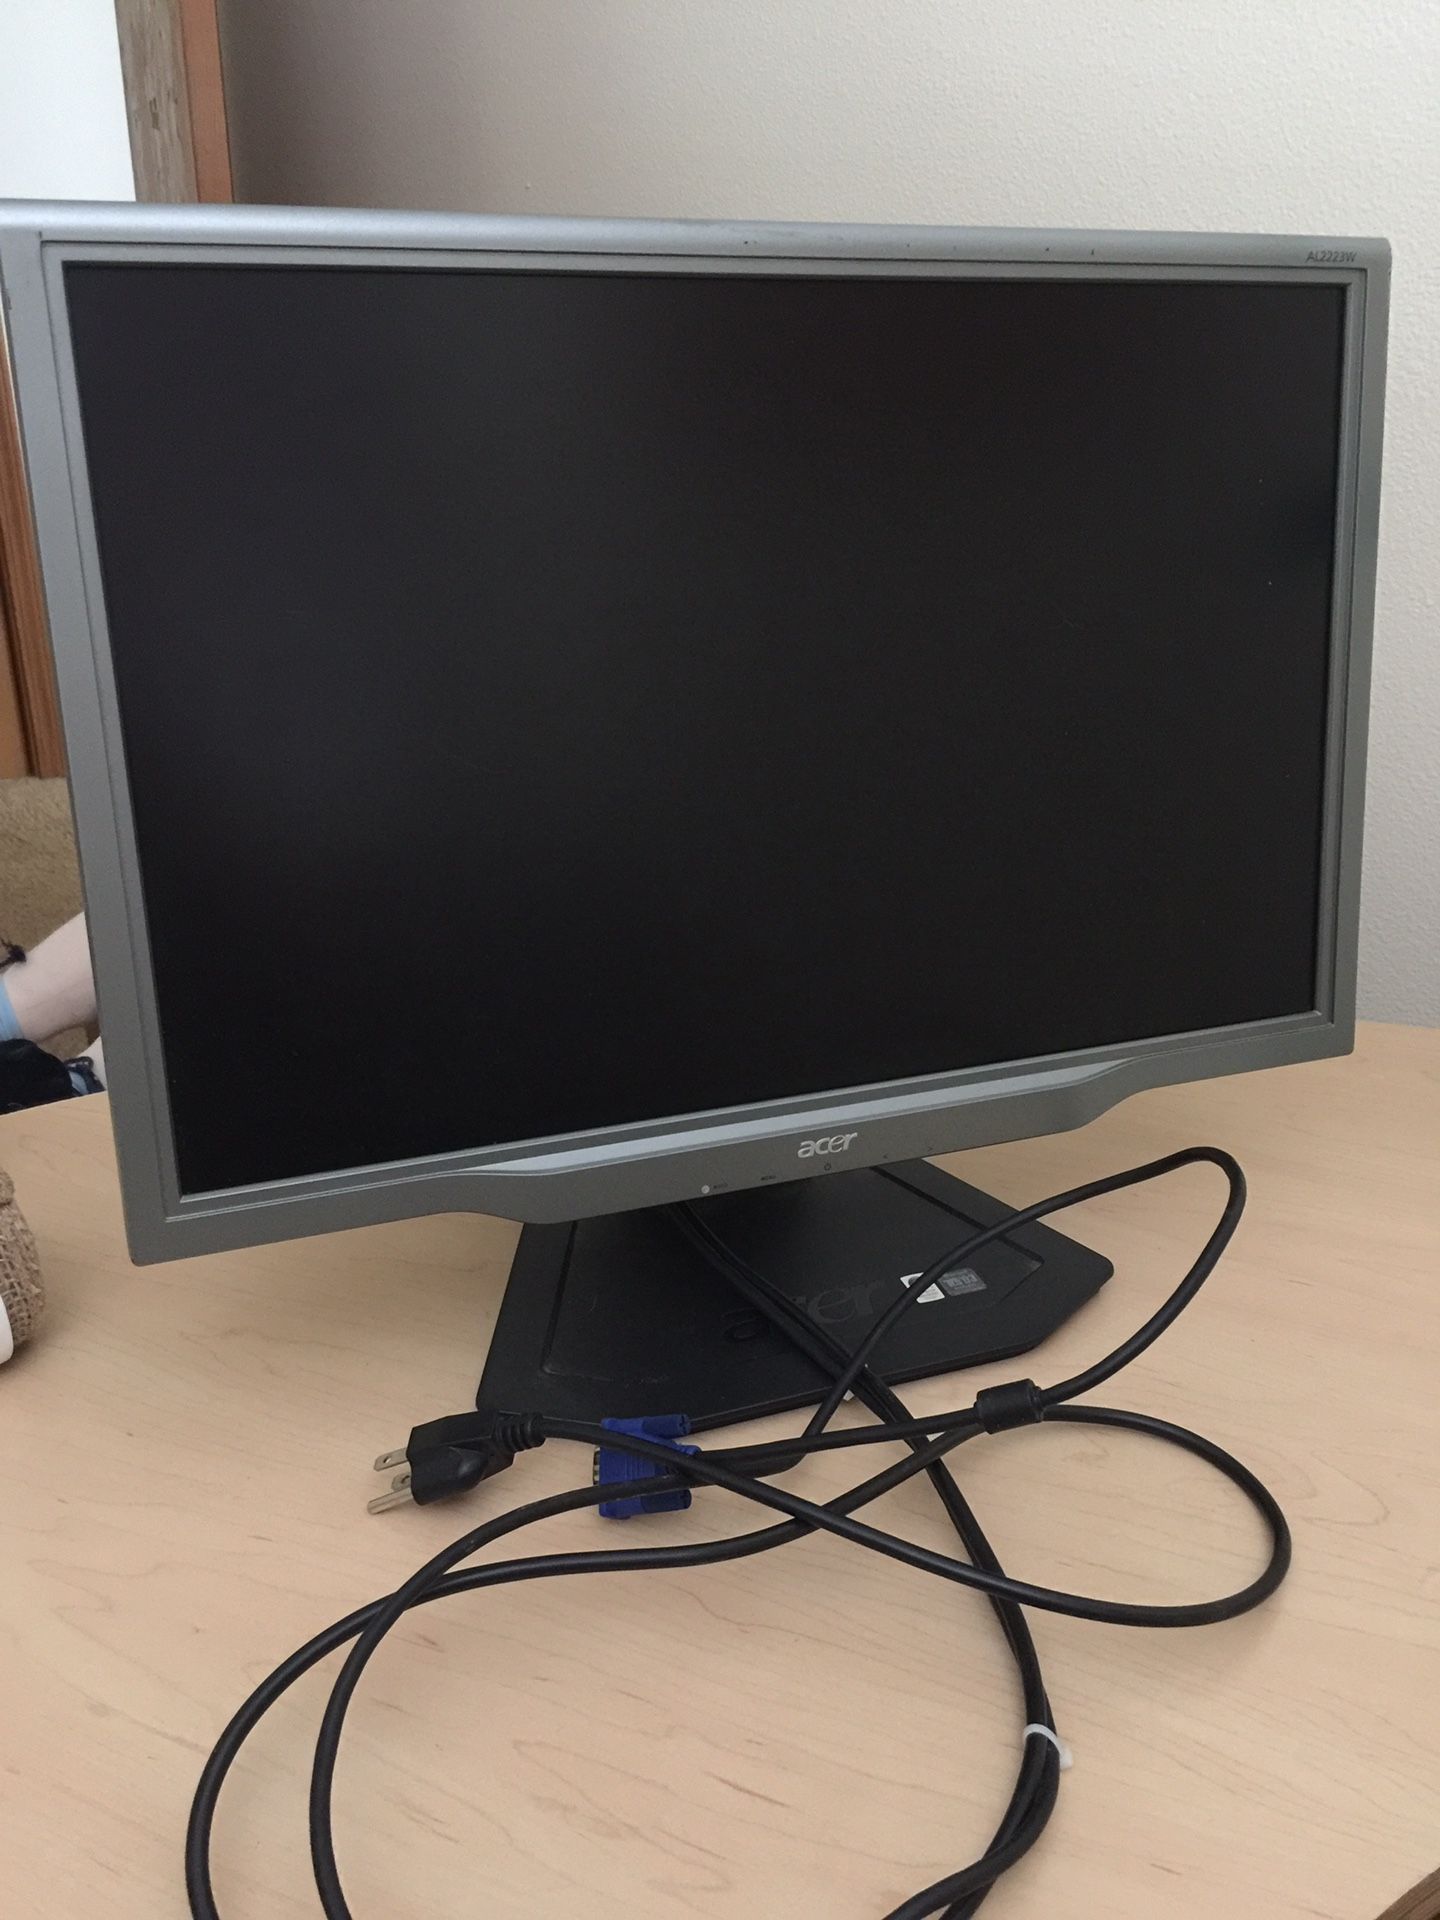 Acer 22” Computer Monitor